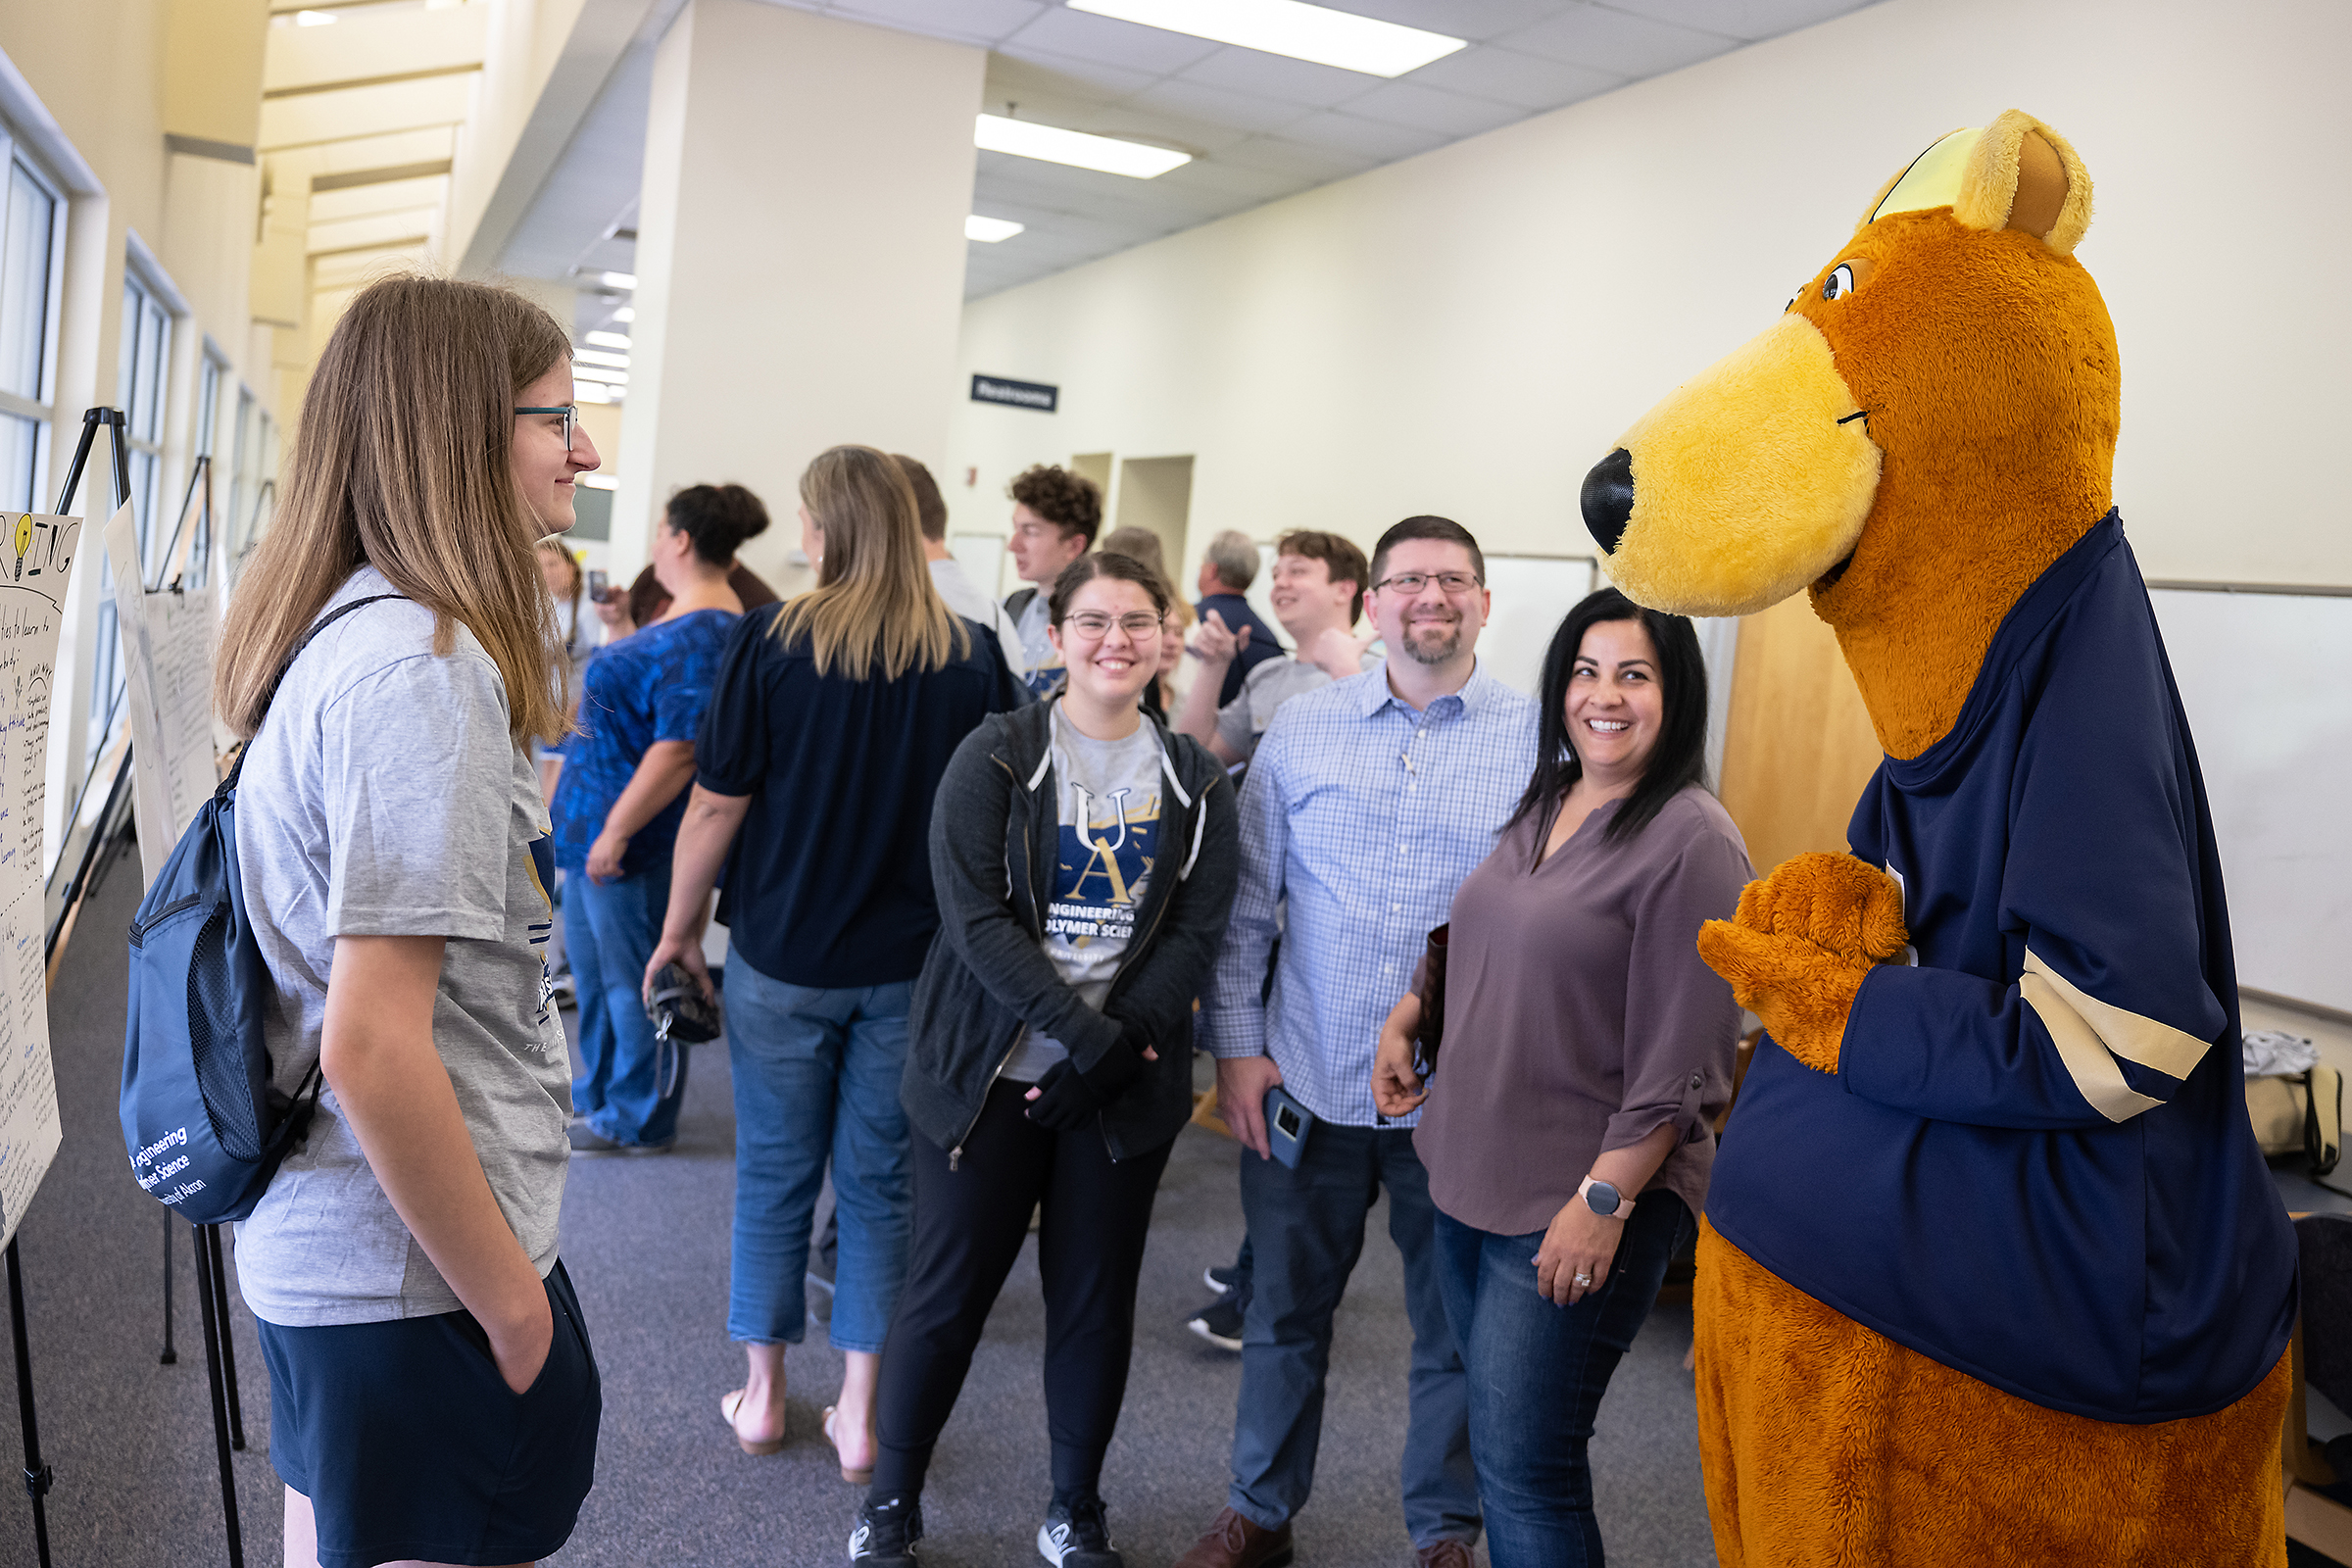 Zippy takes a look at the student poster presentations and interacts with students and parents at the awards banquet.